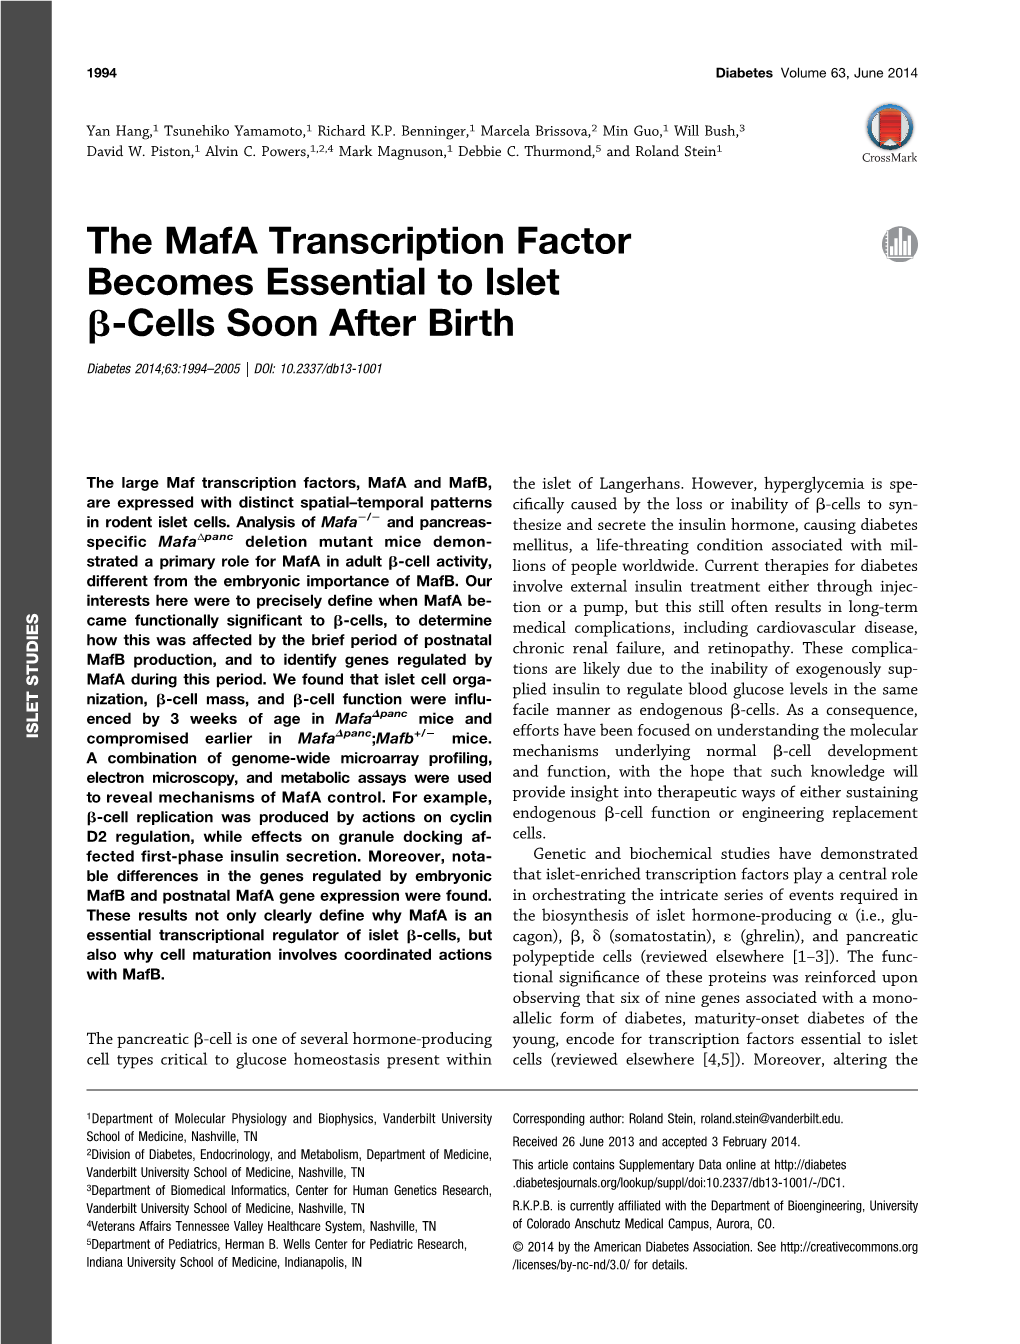 The Mafa Transcription Factor Becomes Essential to Islet B-Cells Soon After Birth